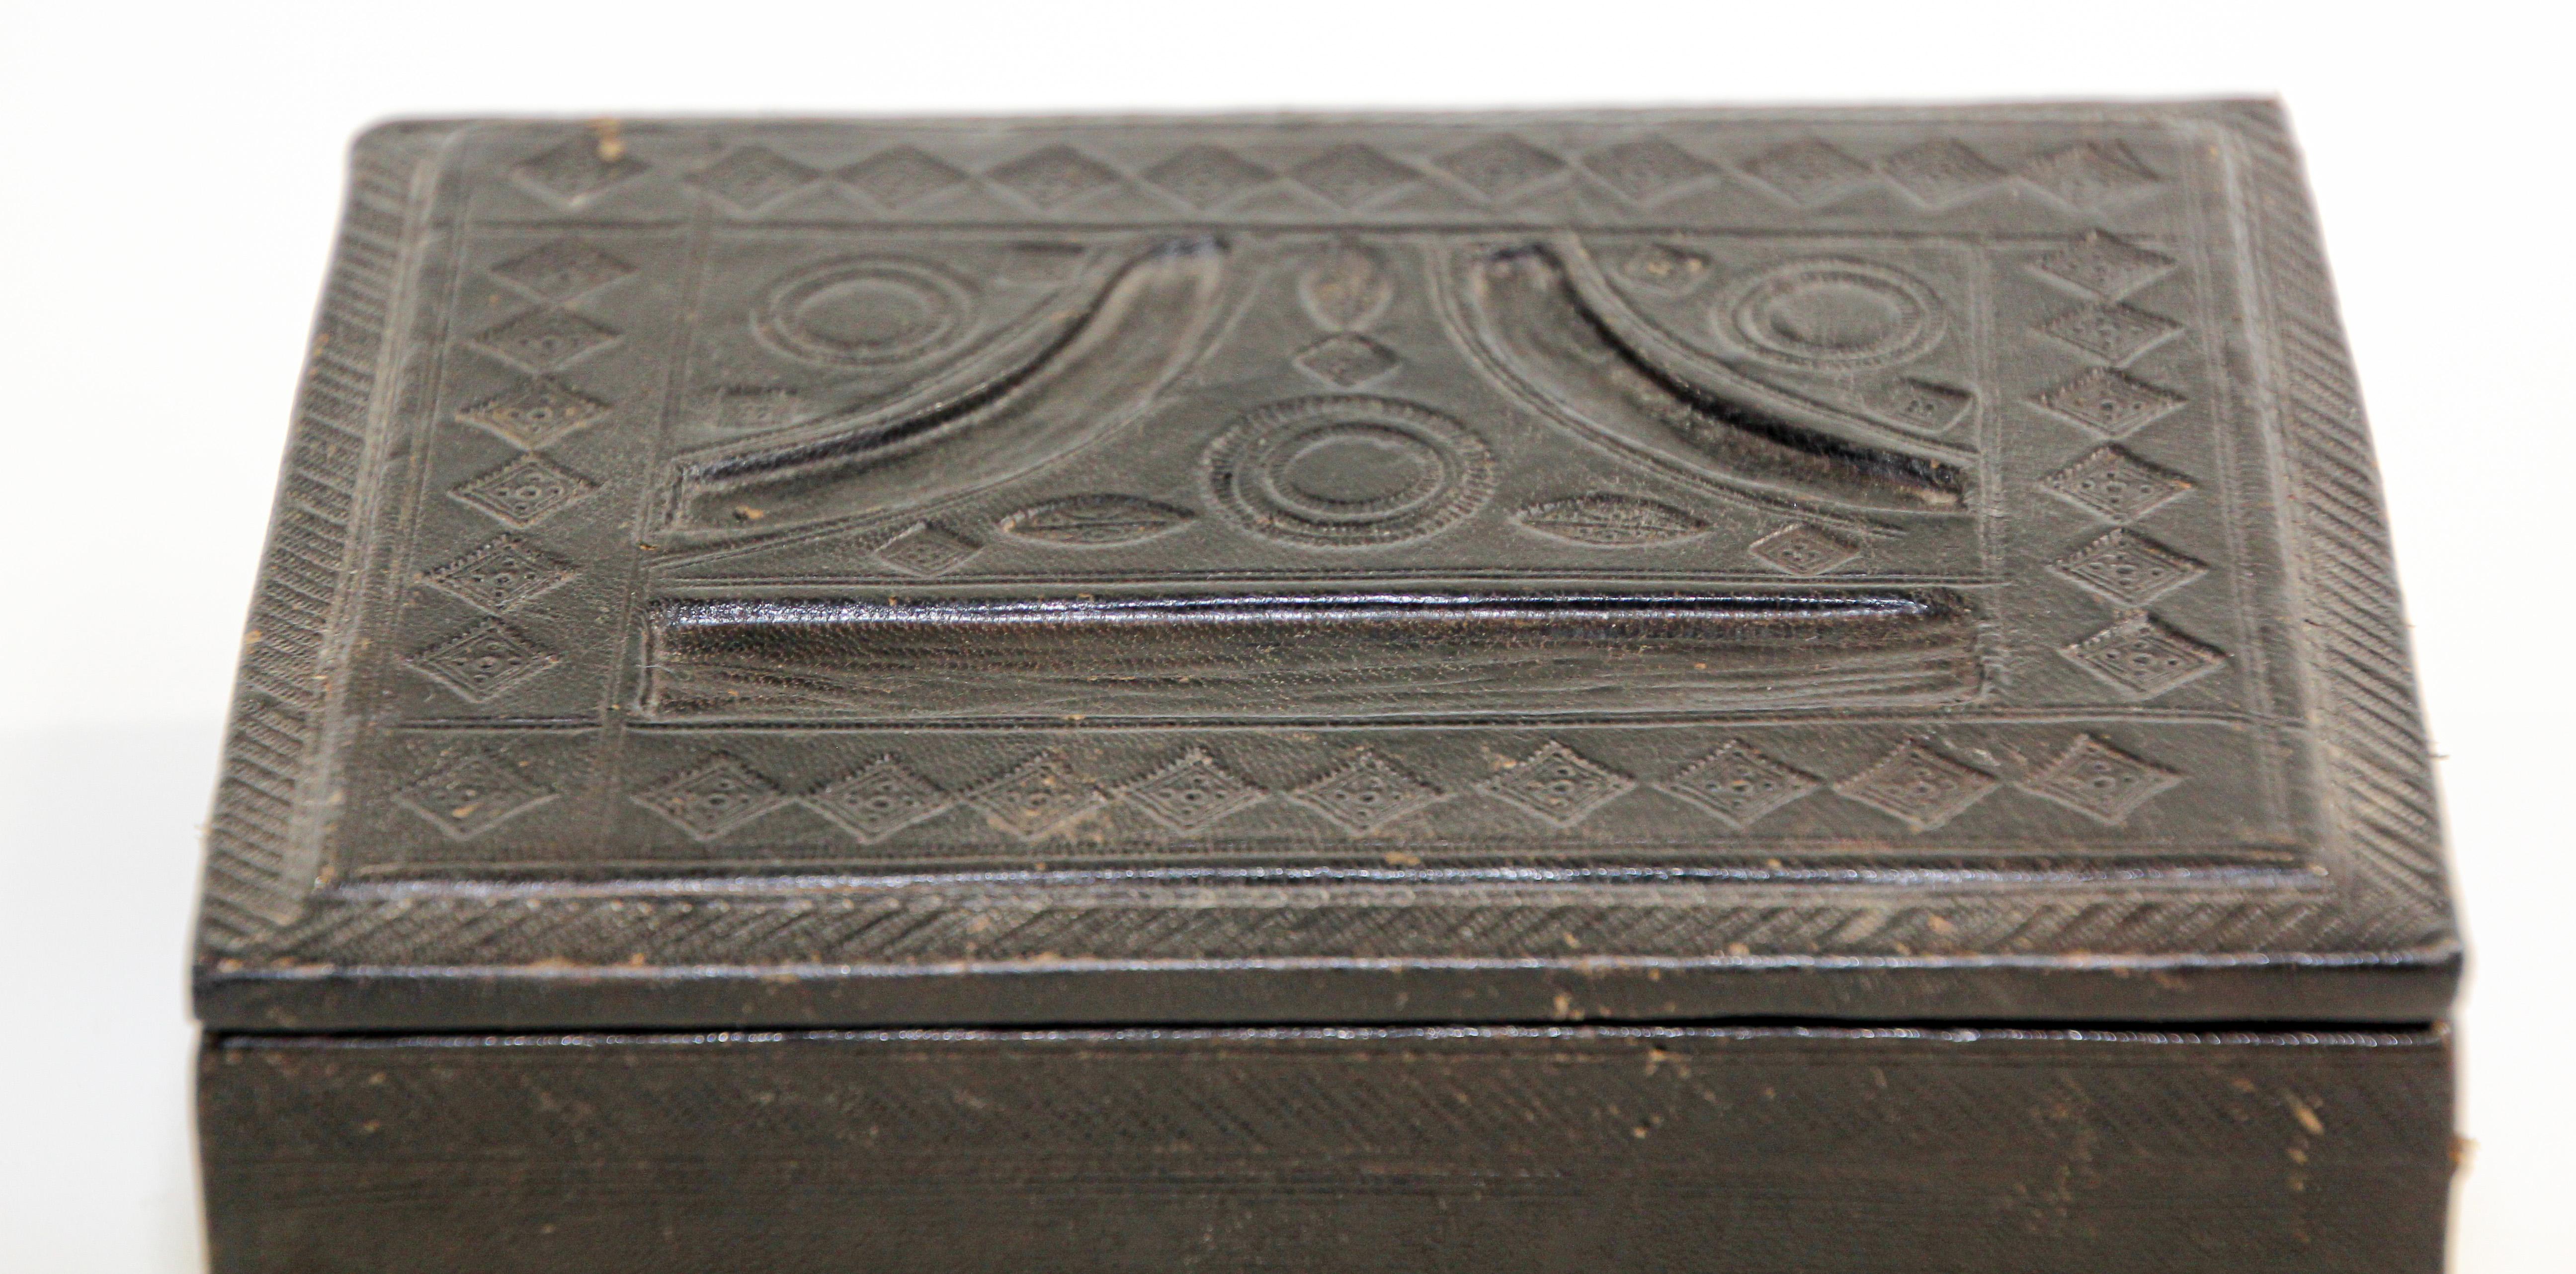 Hand tooled black leather box from Africa.
Very fine workmanship with tribal traditional African symbols on black leather.
Tuareg style probably Mauritania.
Open to a leather lined interior.
Dimensions: 6